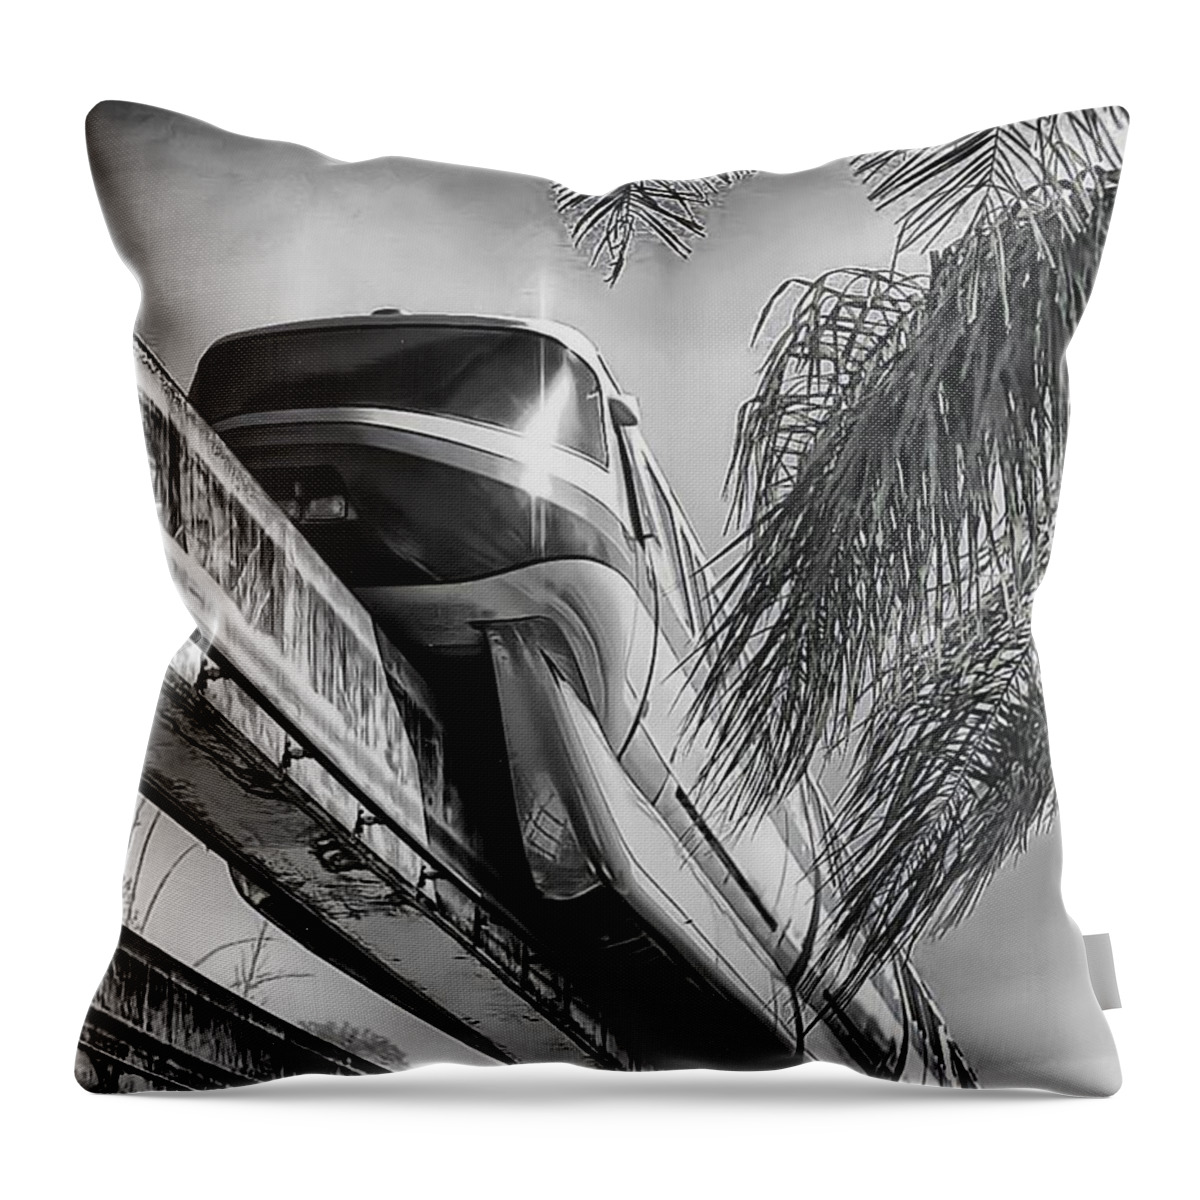 Monorail Throw Pillow featuring the photograph Monorail by Joyce Baldassarre